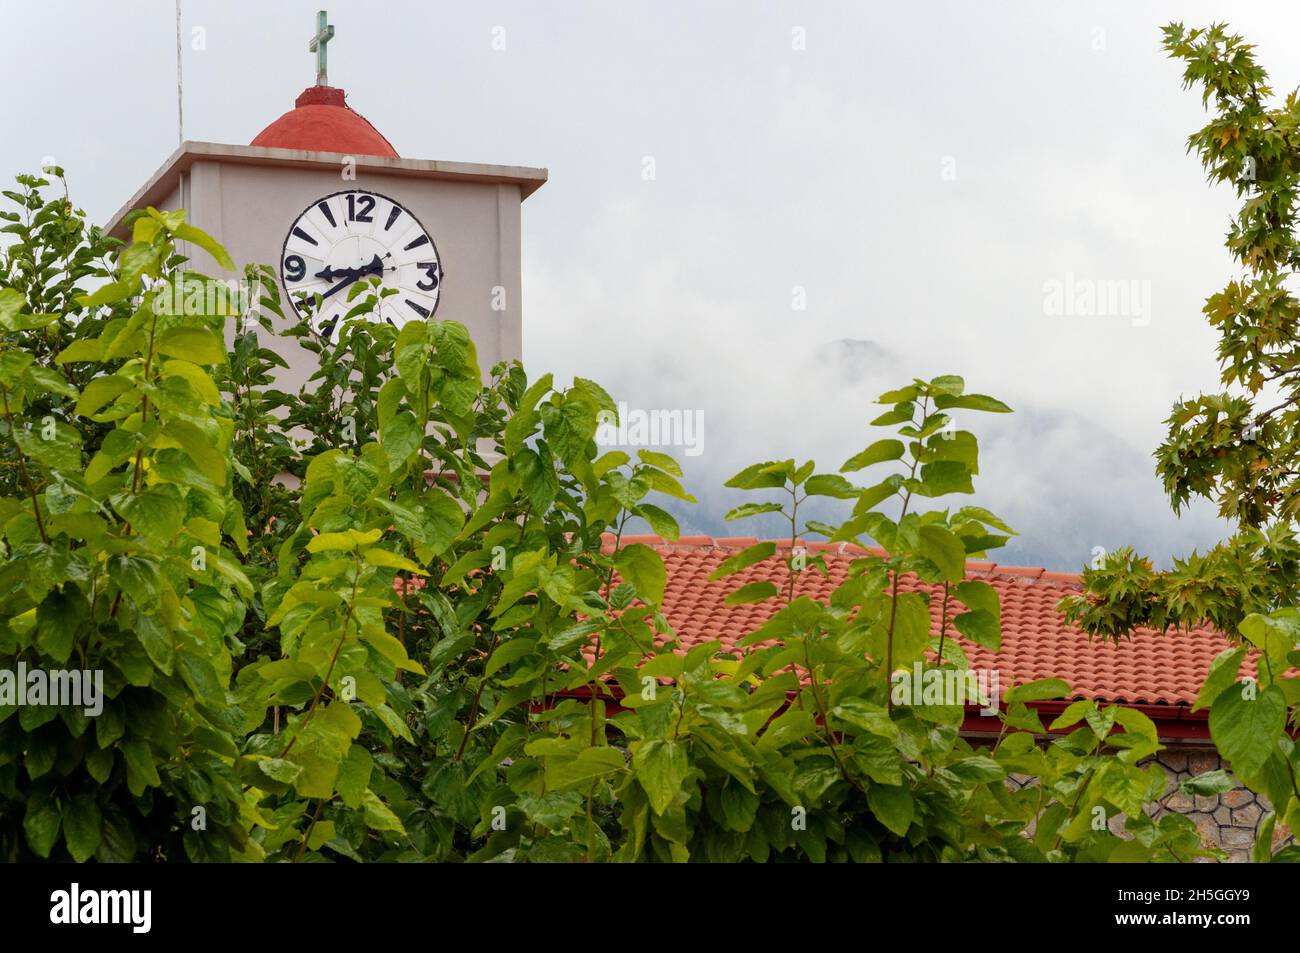 A church clock coming out through the thick leaves of green trees, Fokida, Greece Stock Photo